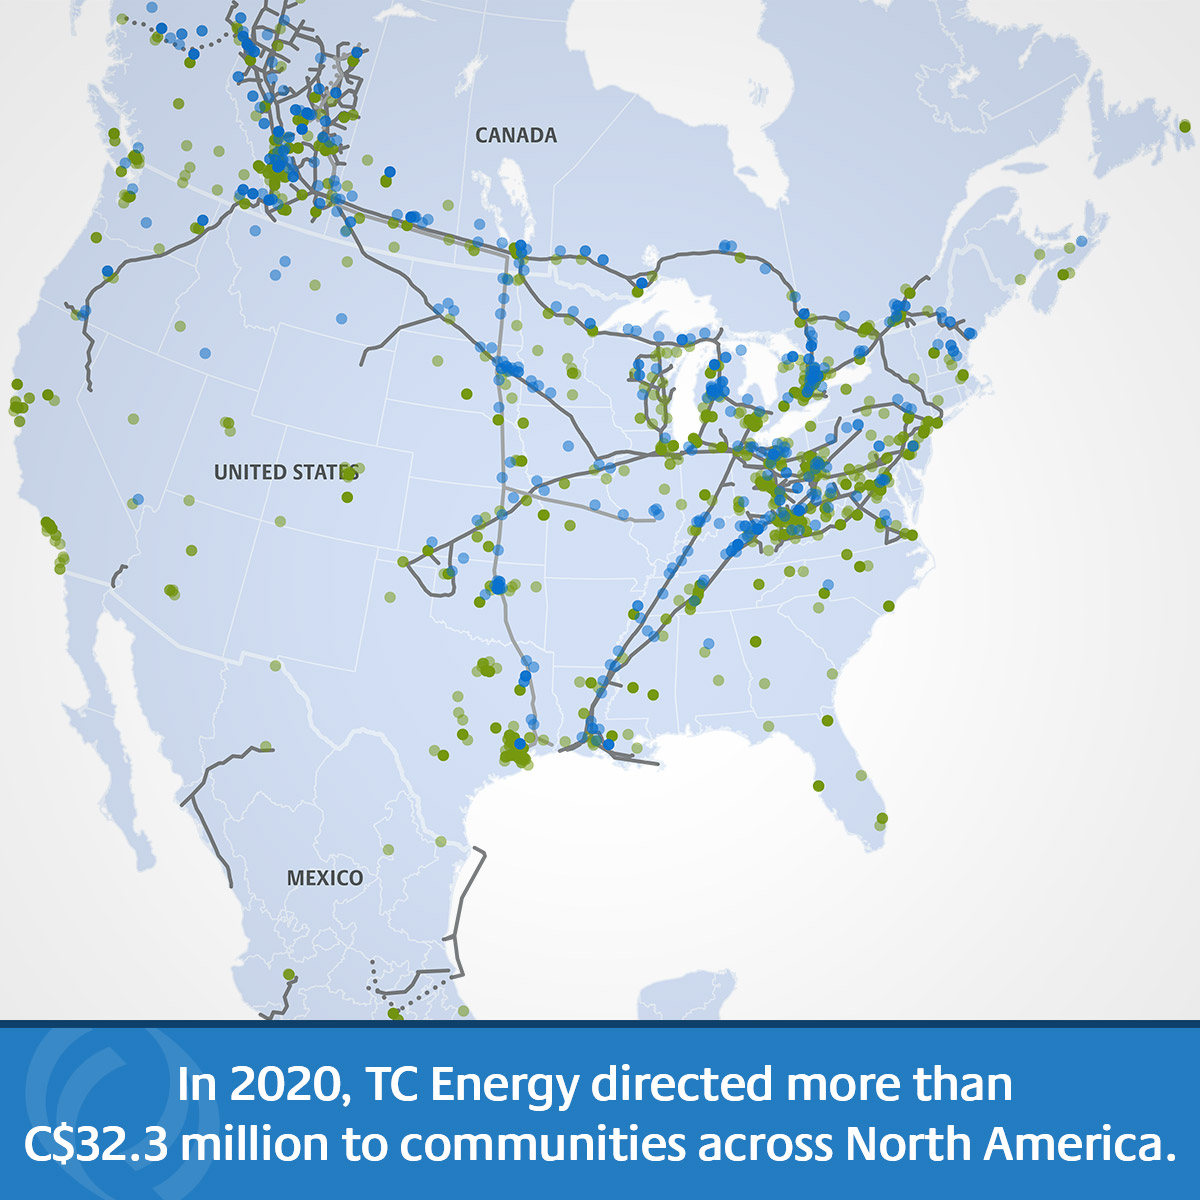 TC Energy directed more than C$32.3 million to communities across North America. 